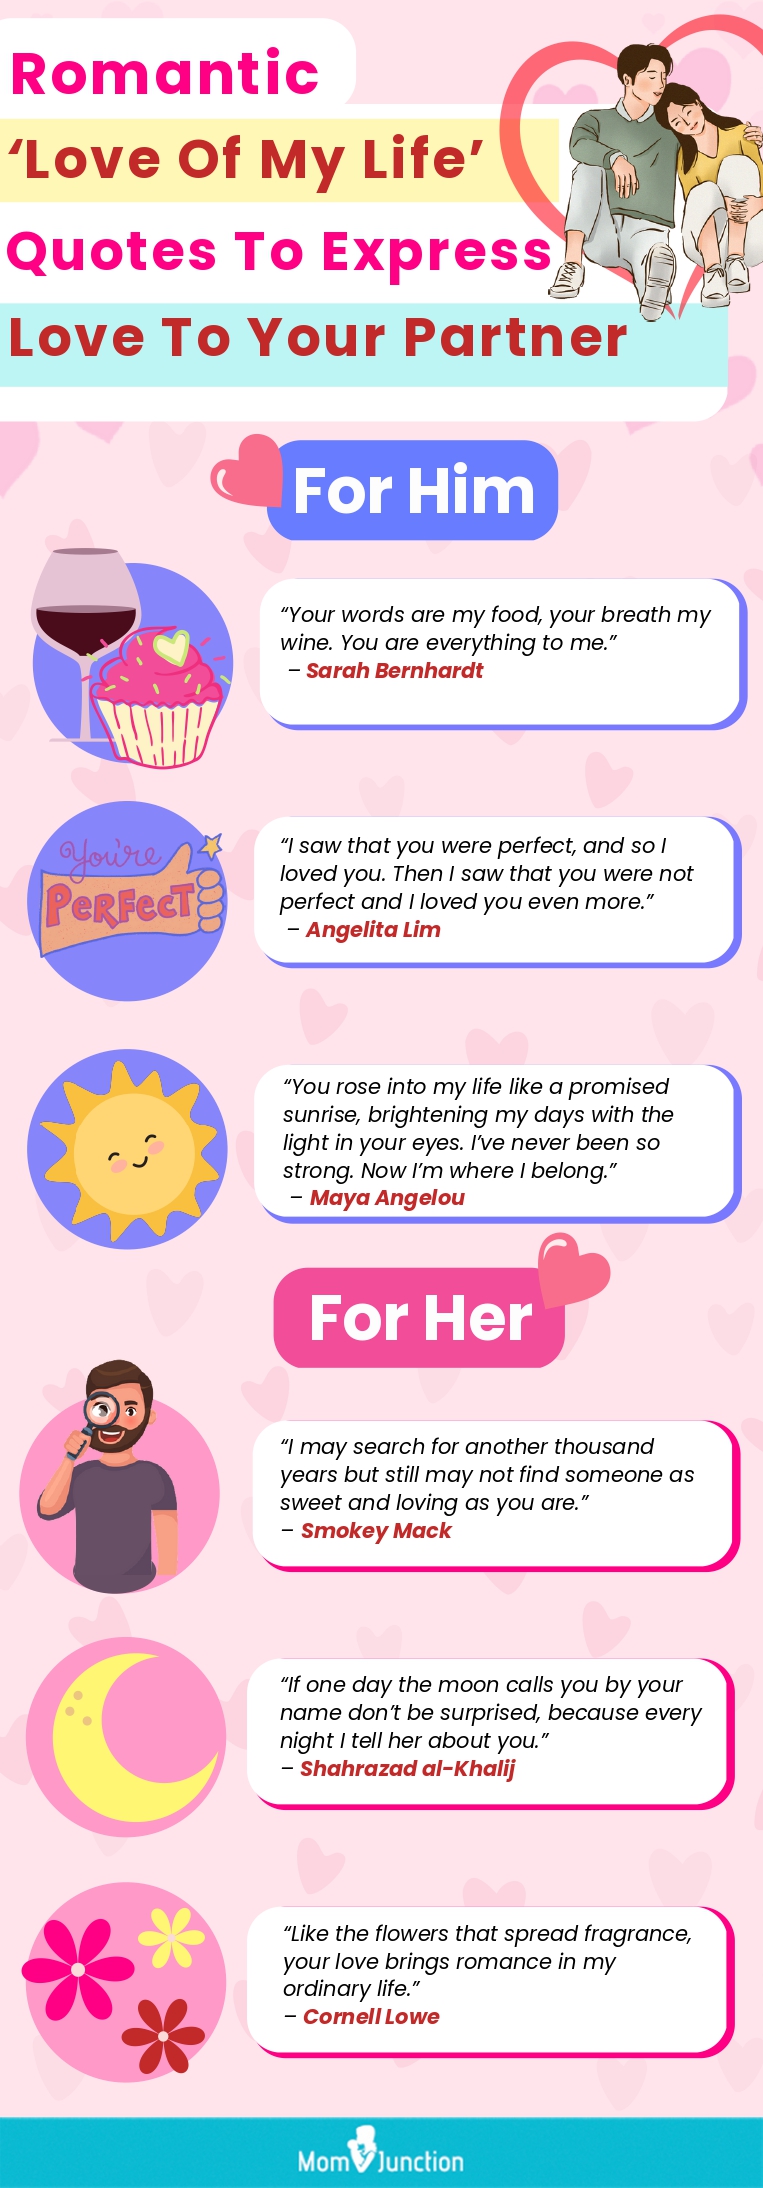 touching love of my life quotes to express love to your partner (infographic)